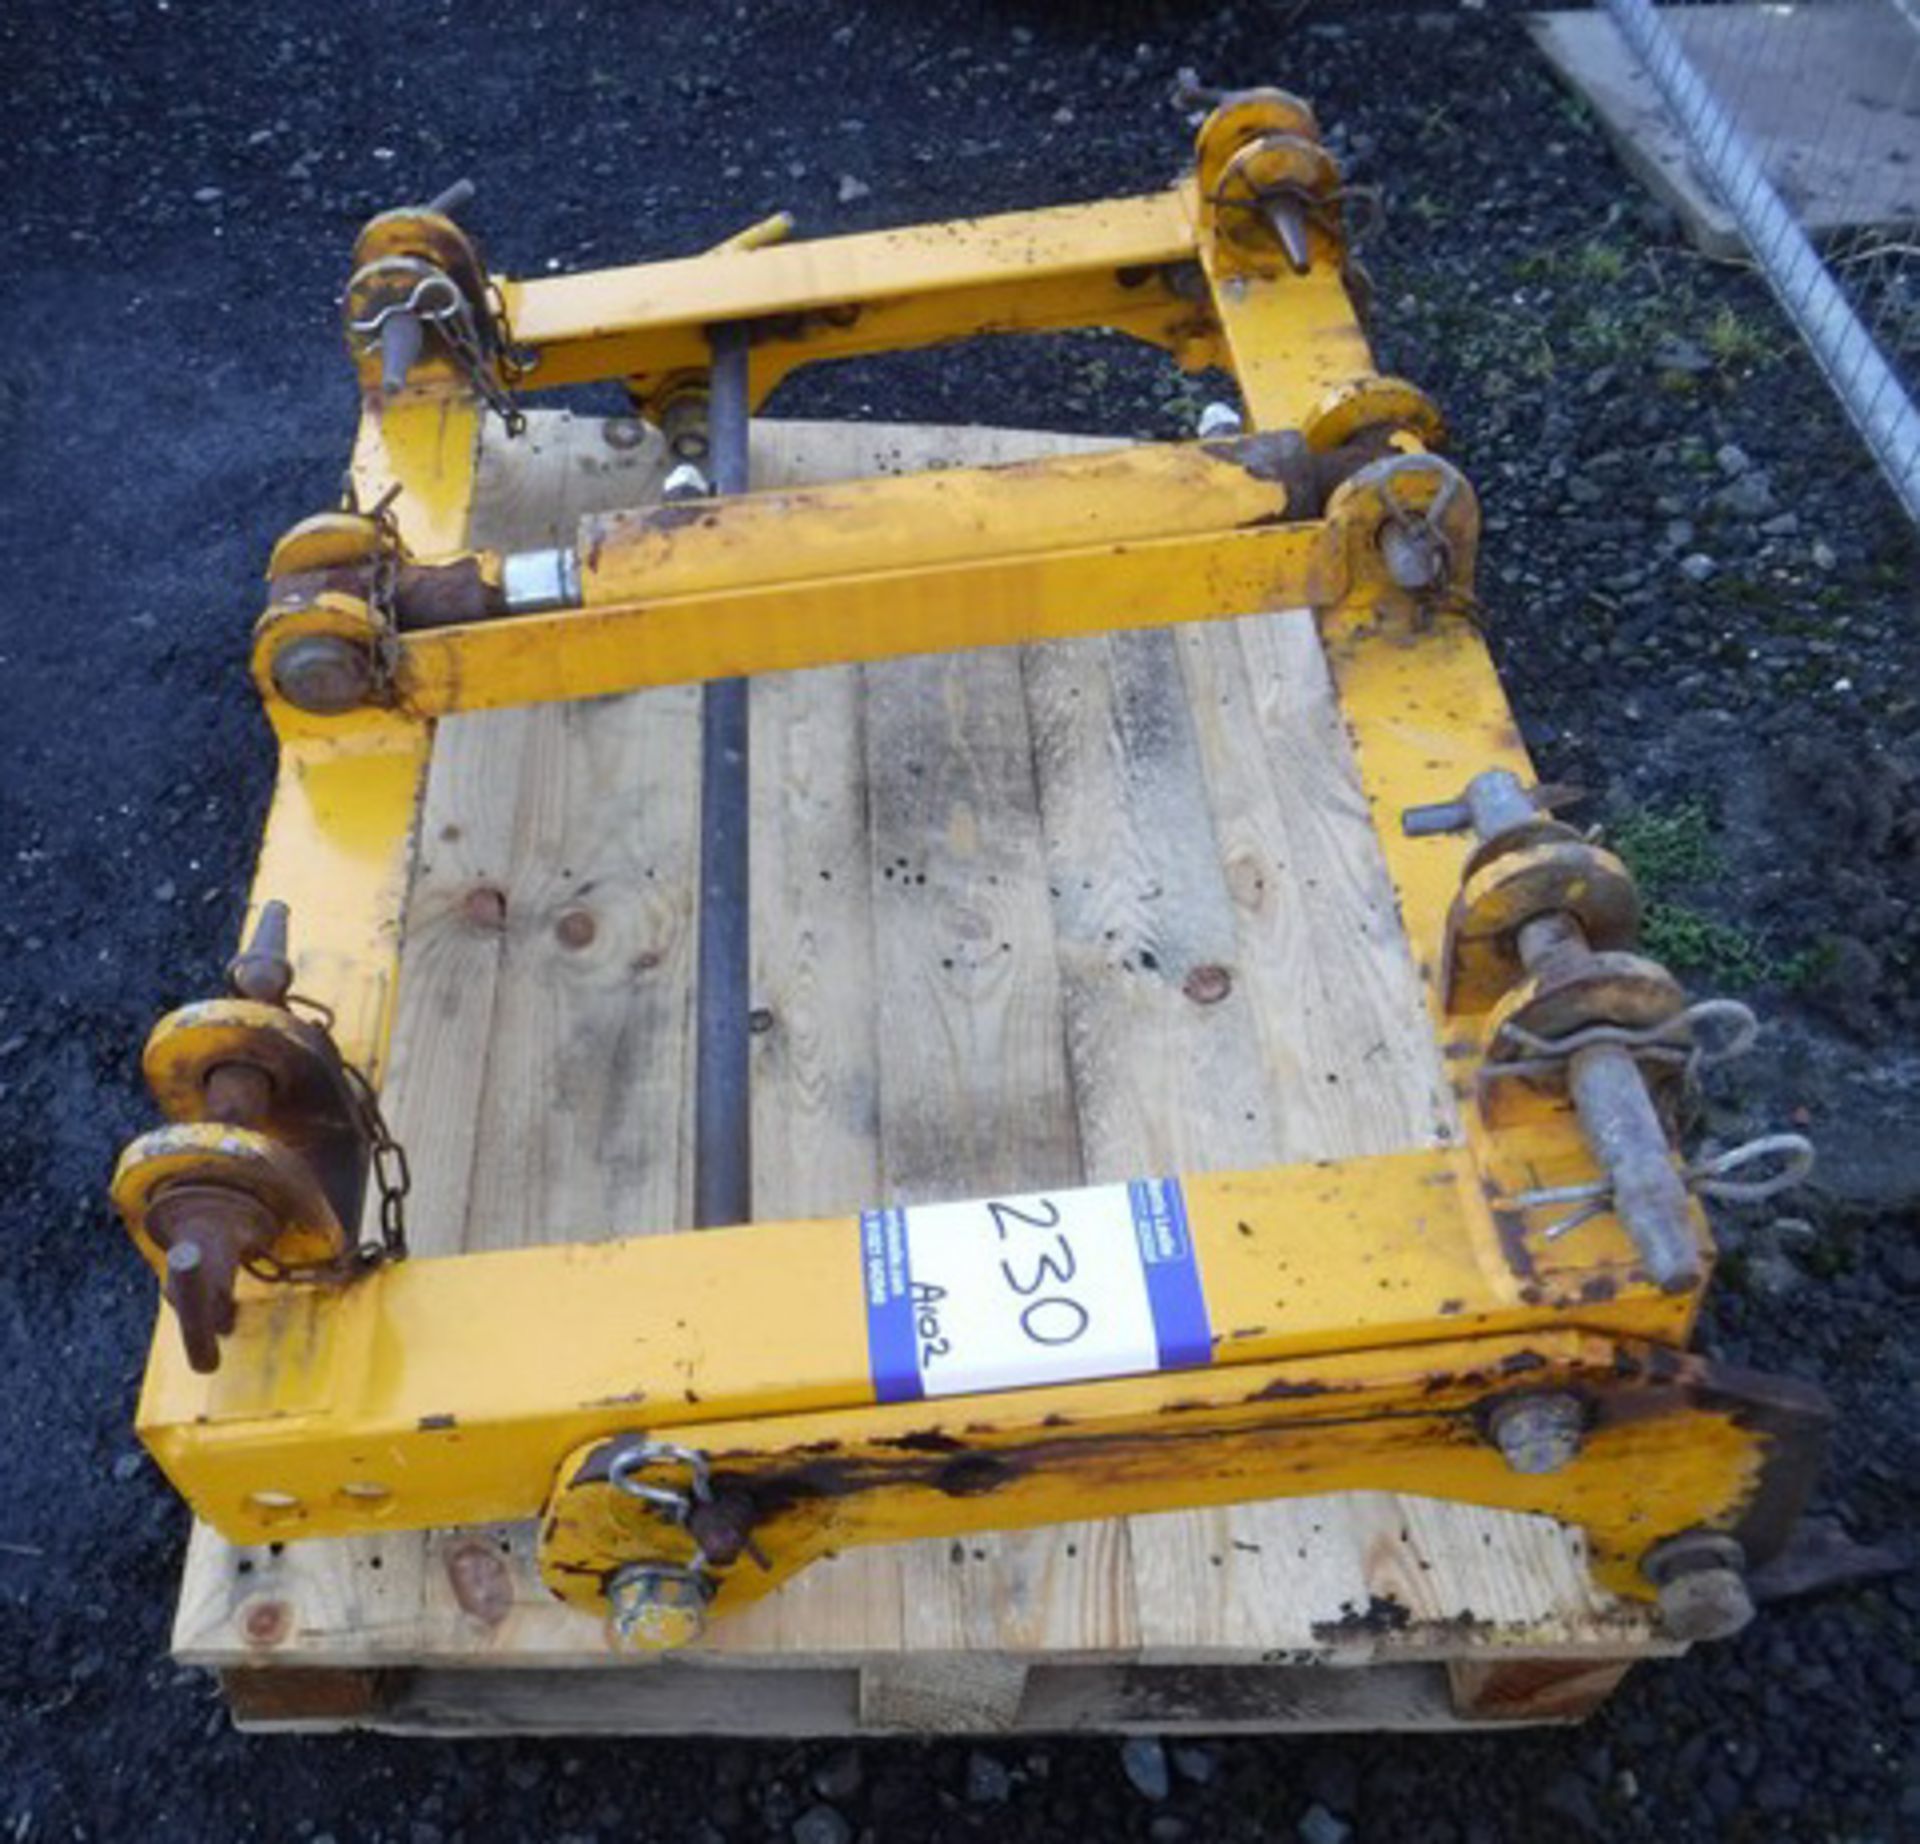 SNOW PLOUGH MOUNTING FRAME FOR ATTACHING PLOUGH TO LORRY - Image 2 of 2